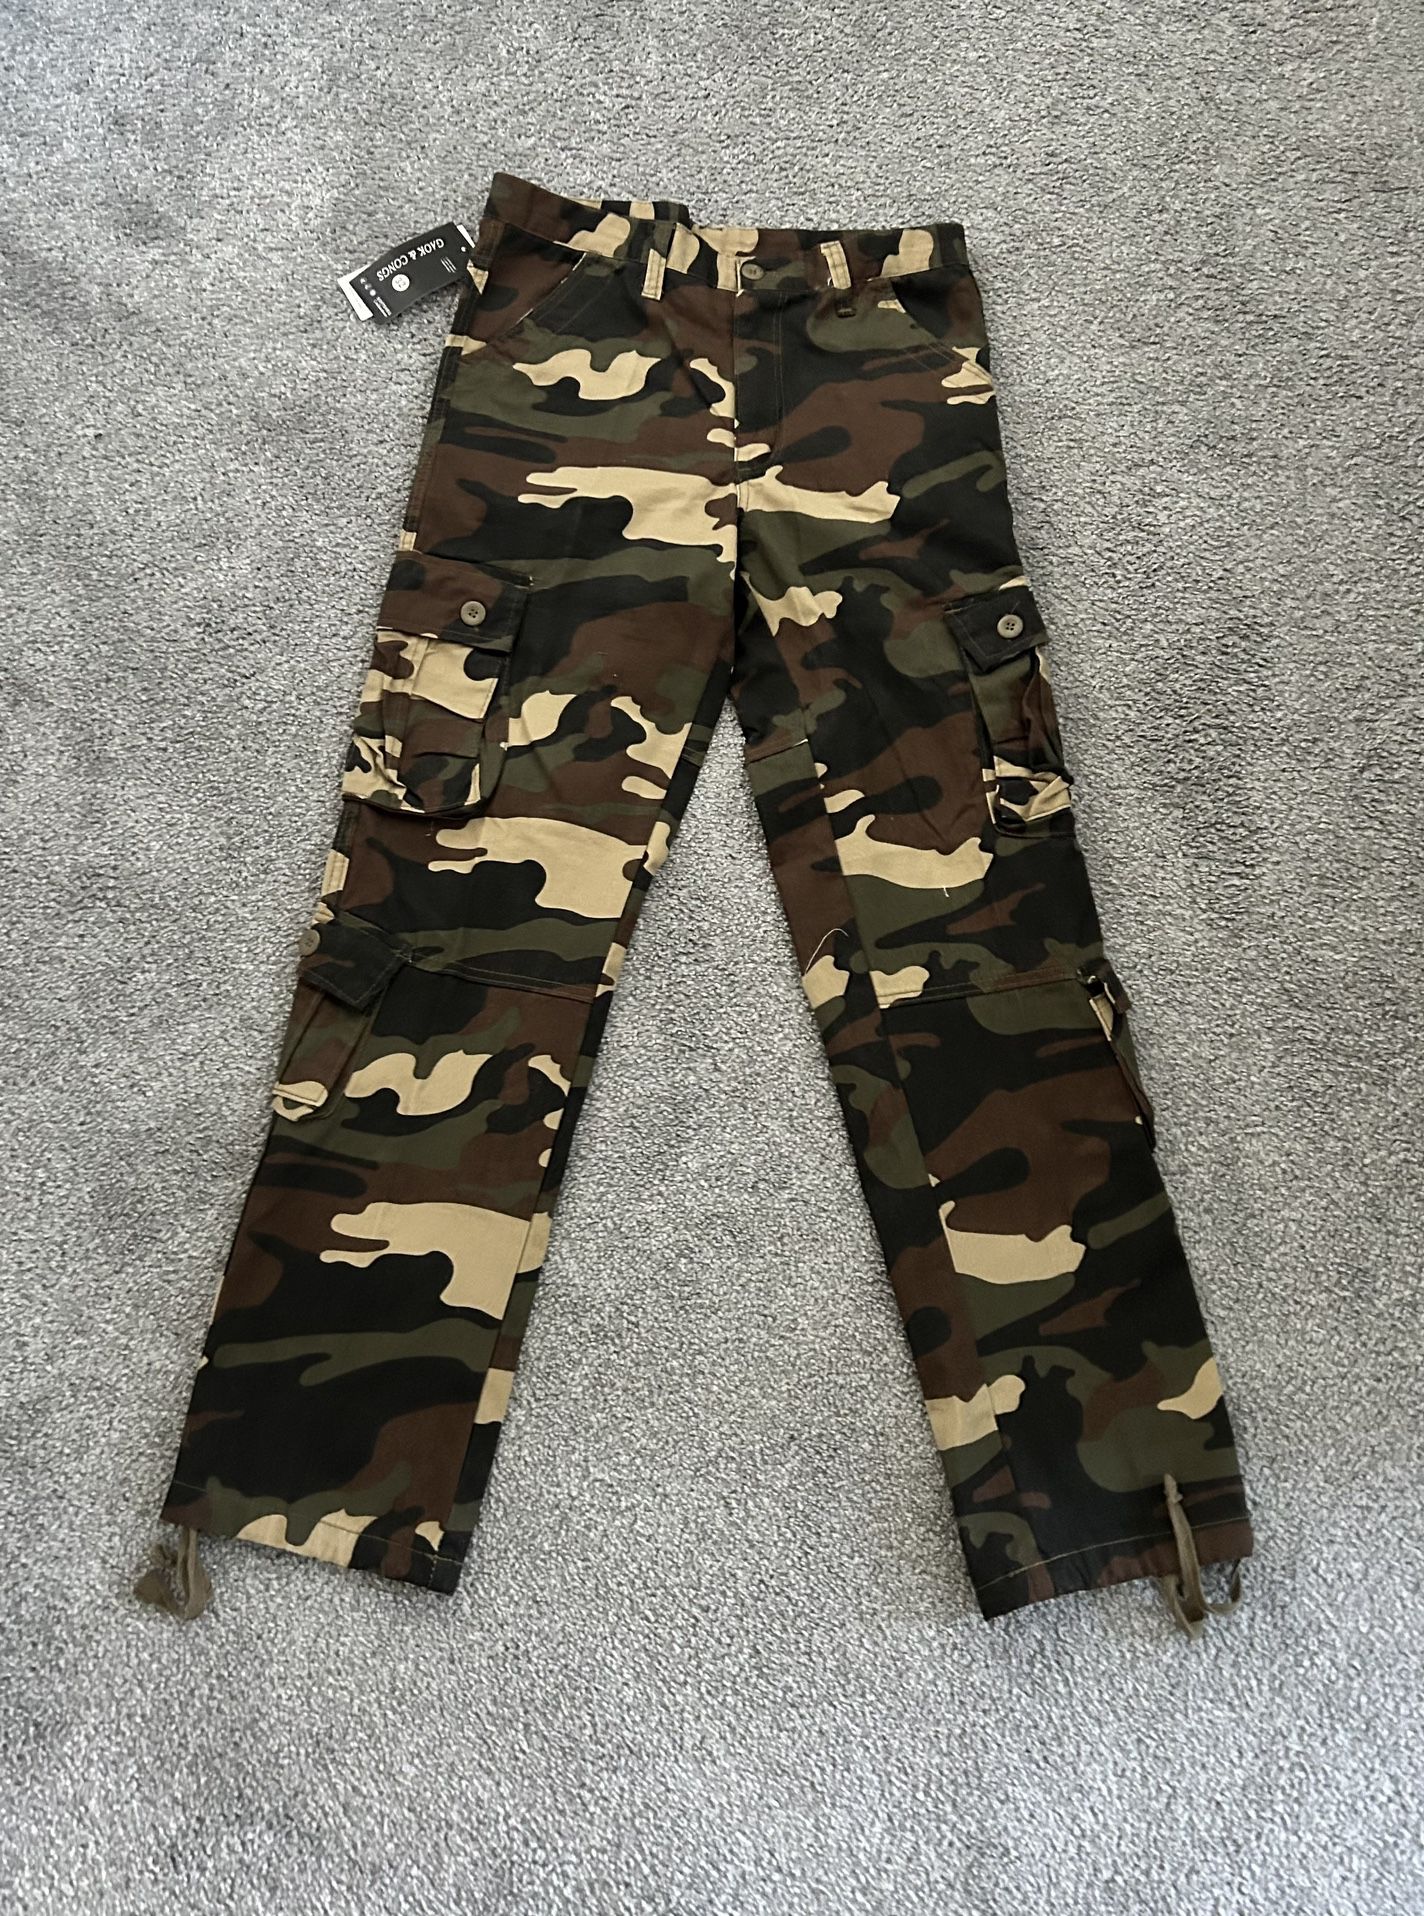 GAOK & CONGS cargo Army Pants Size 32